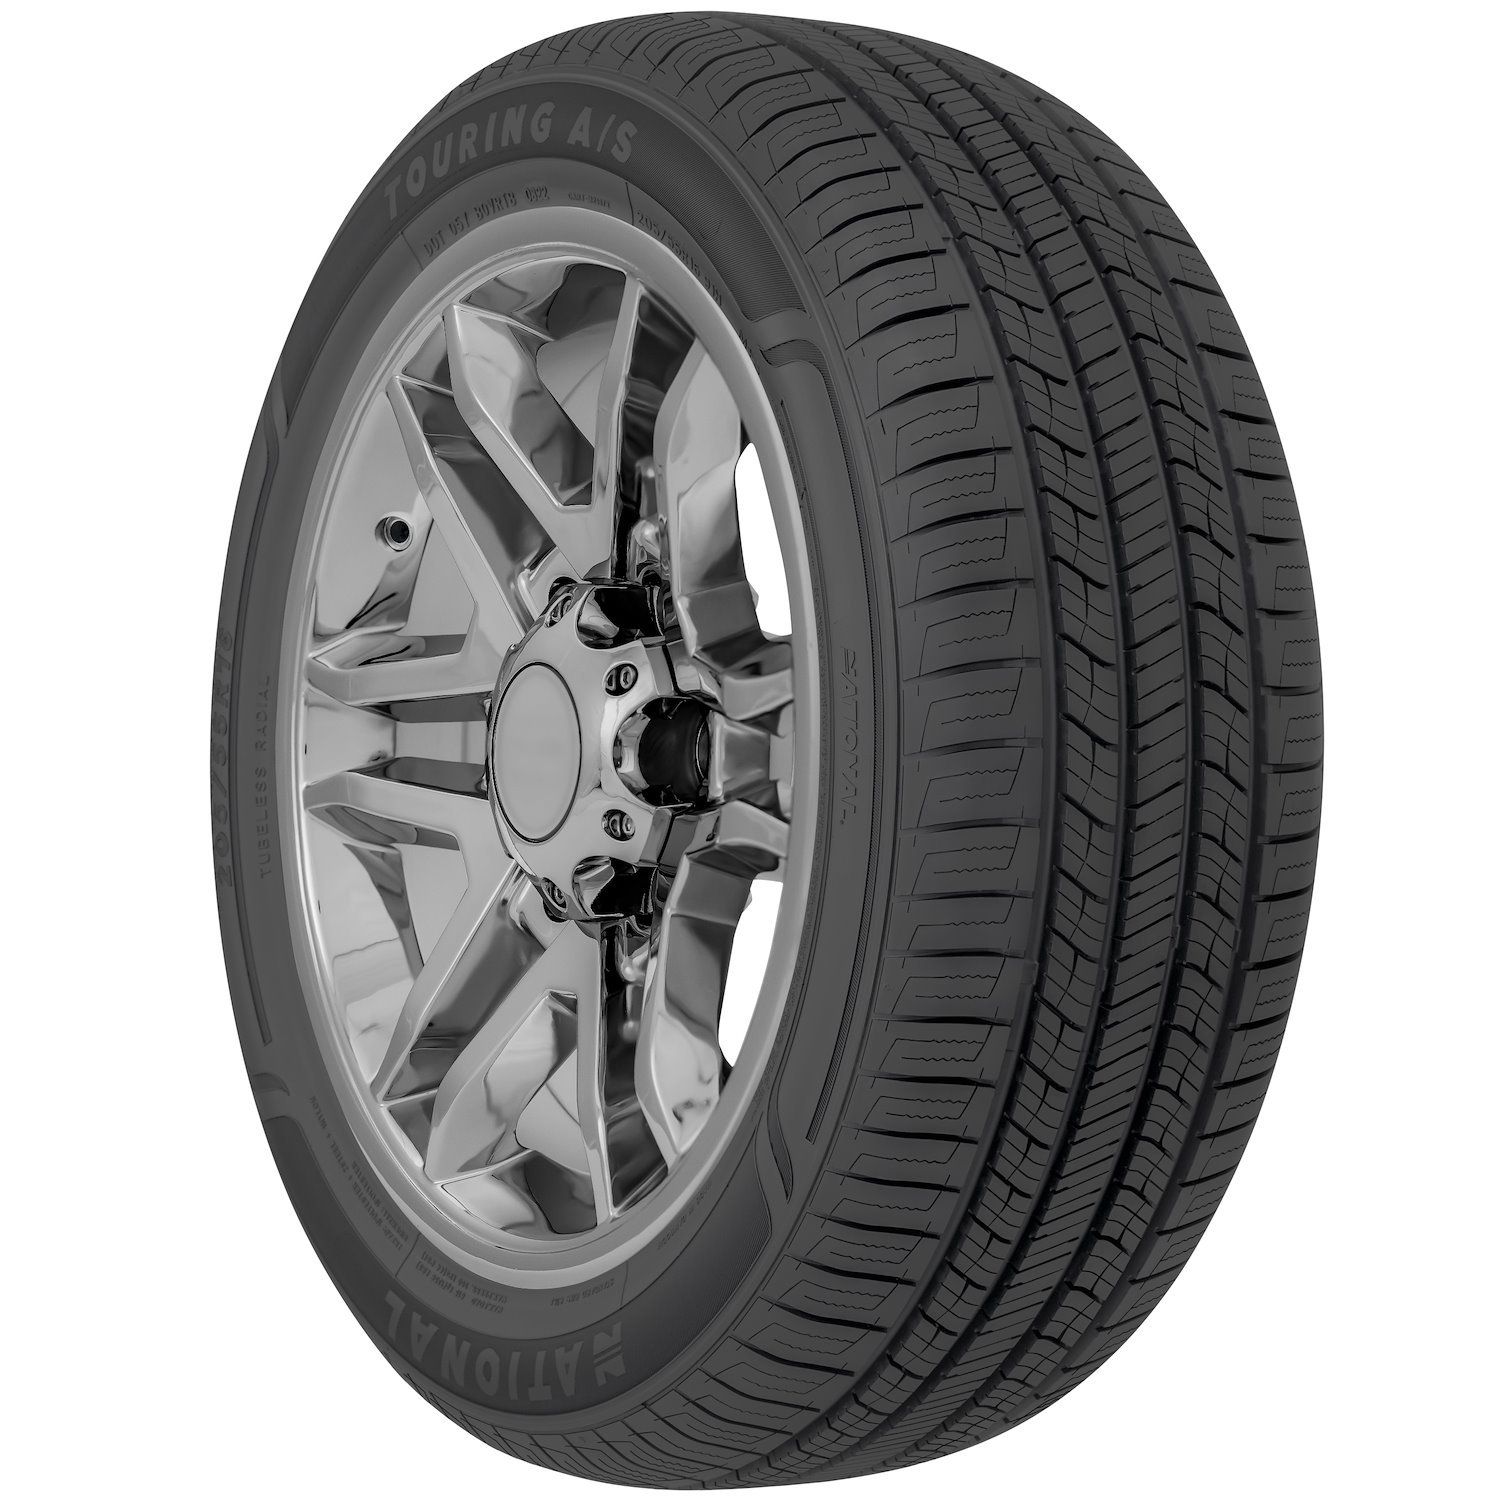 NLR55 Touring A/S Tire, 215/65R16